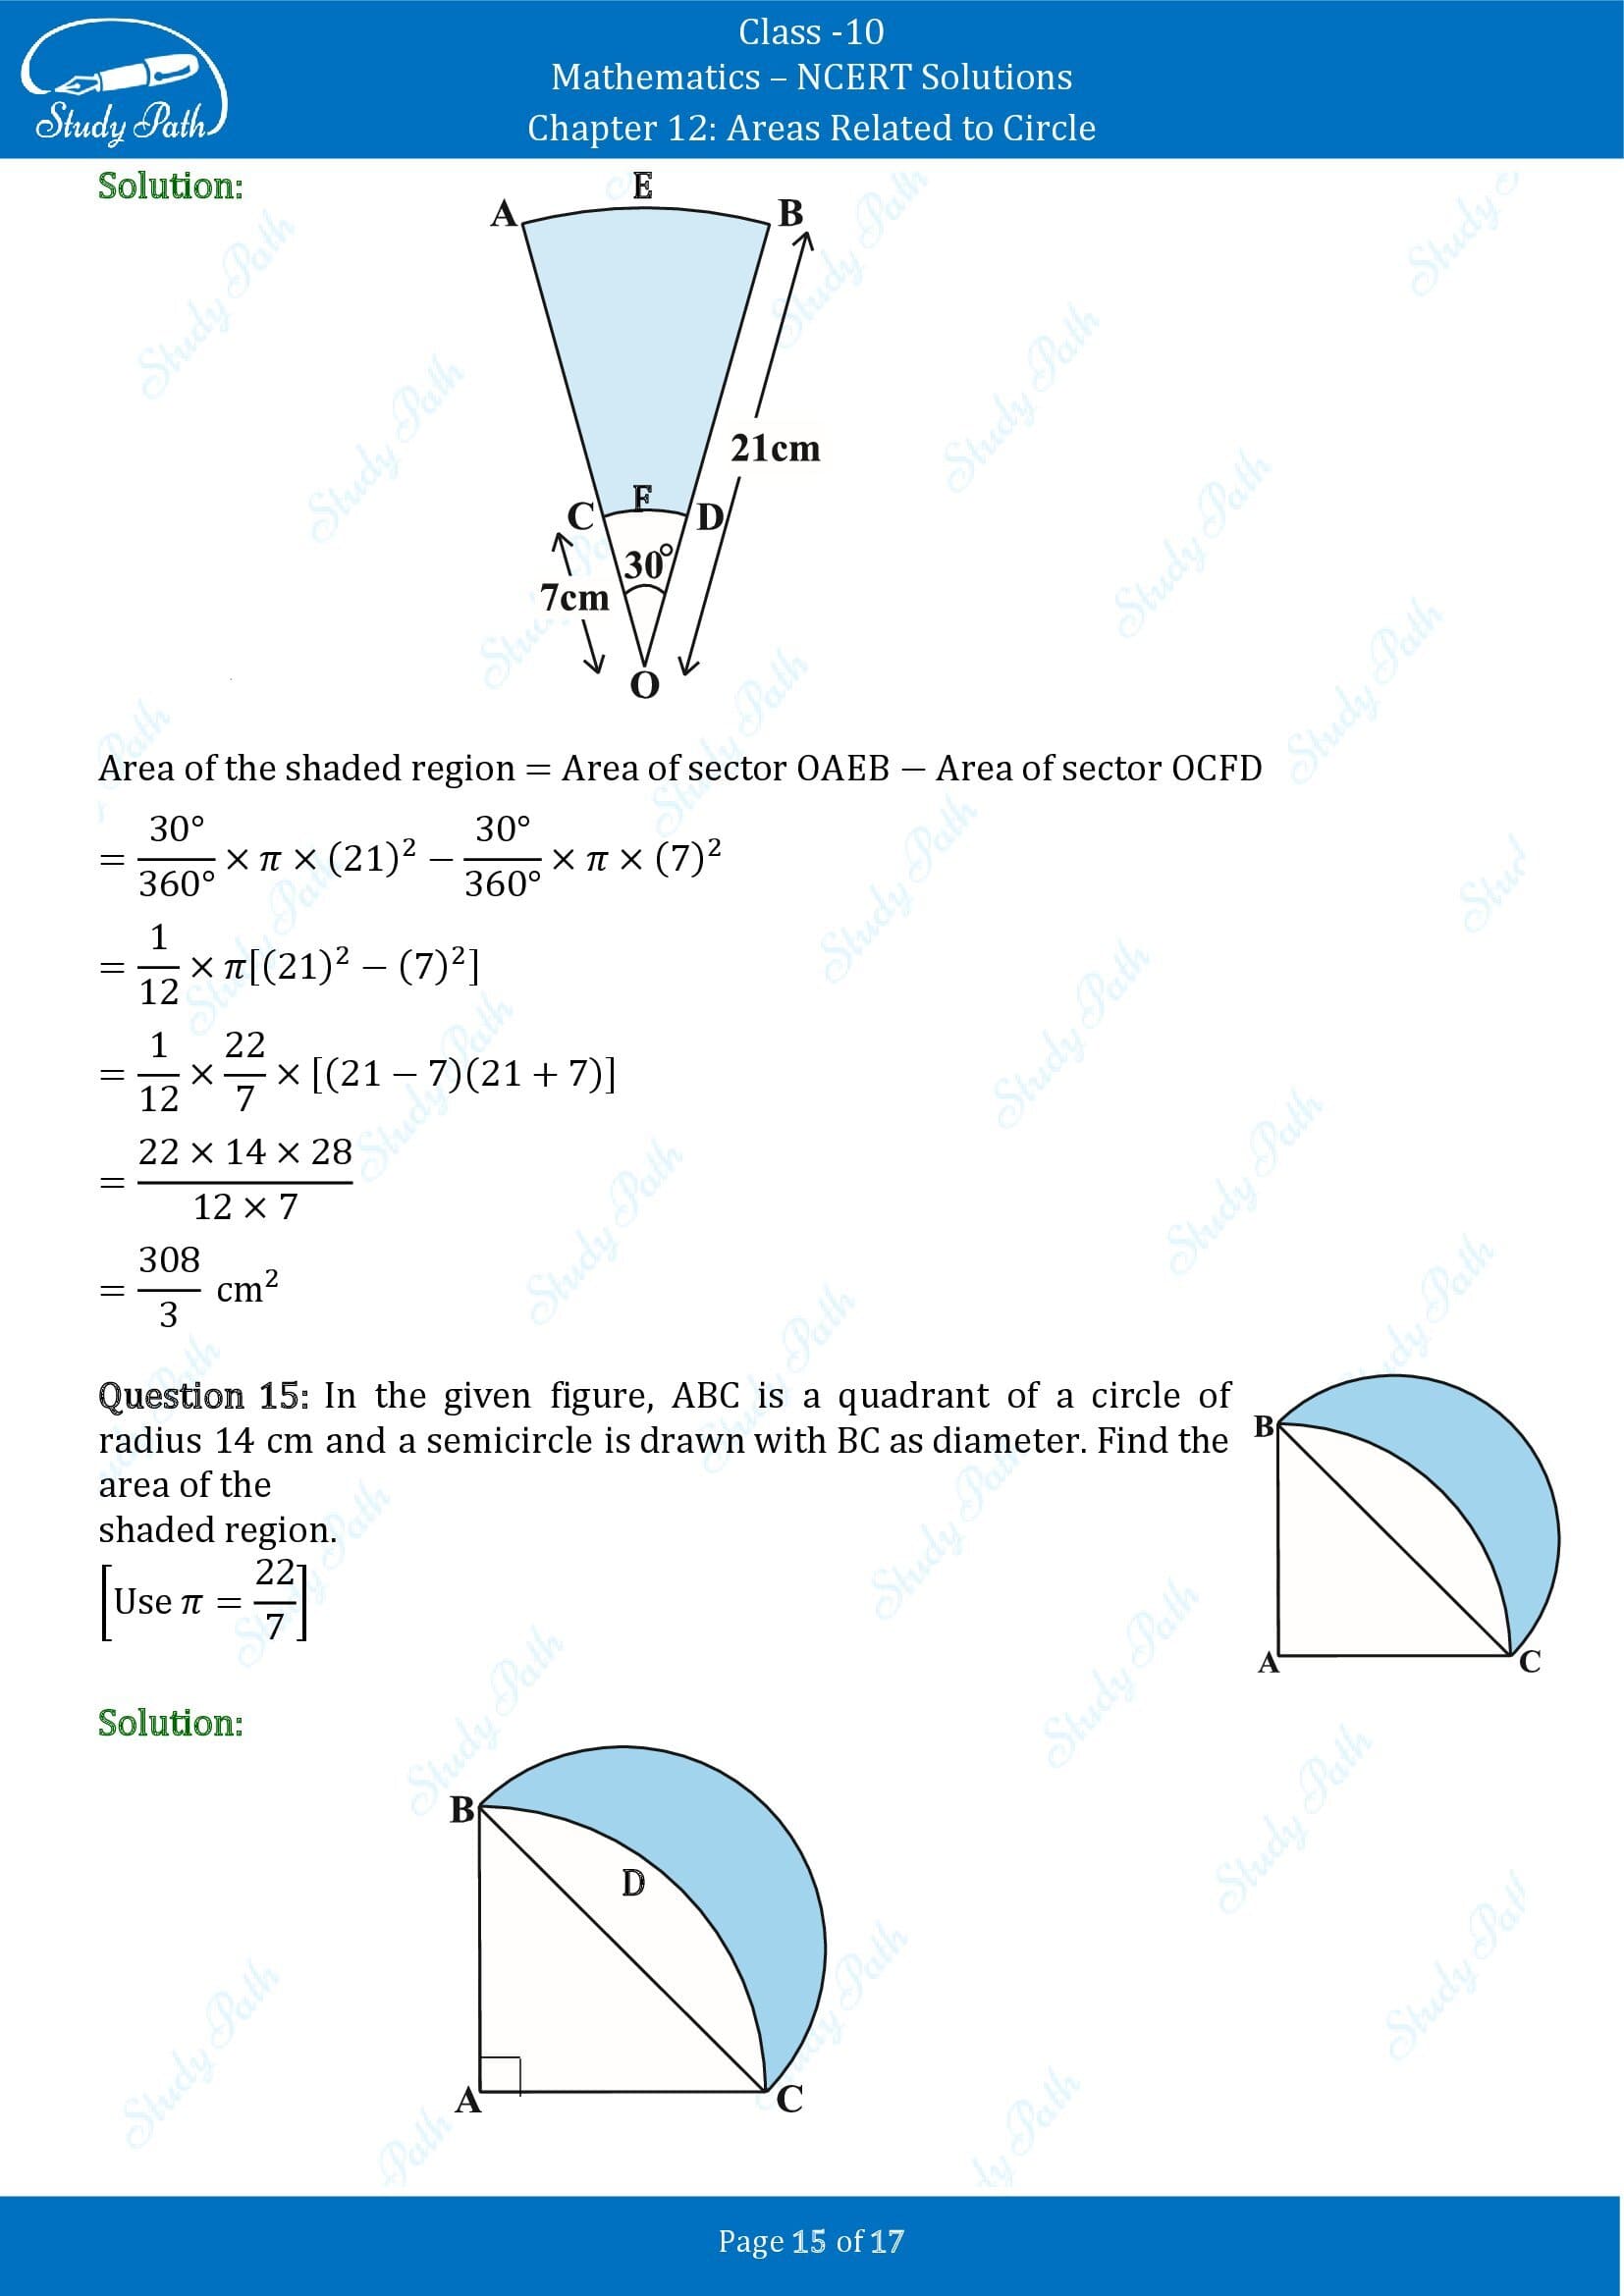 NCERT Solutions for Class 10 Maths Chapter 12 Areas Related to Circles Exercise 12.3 00015